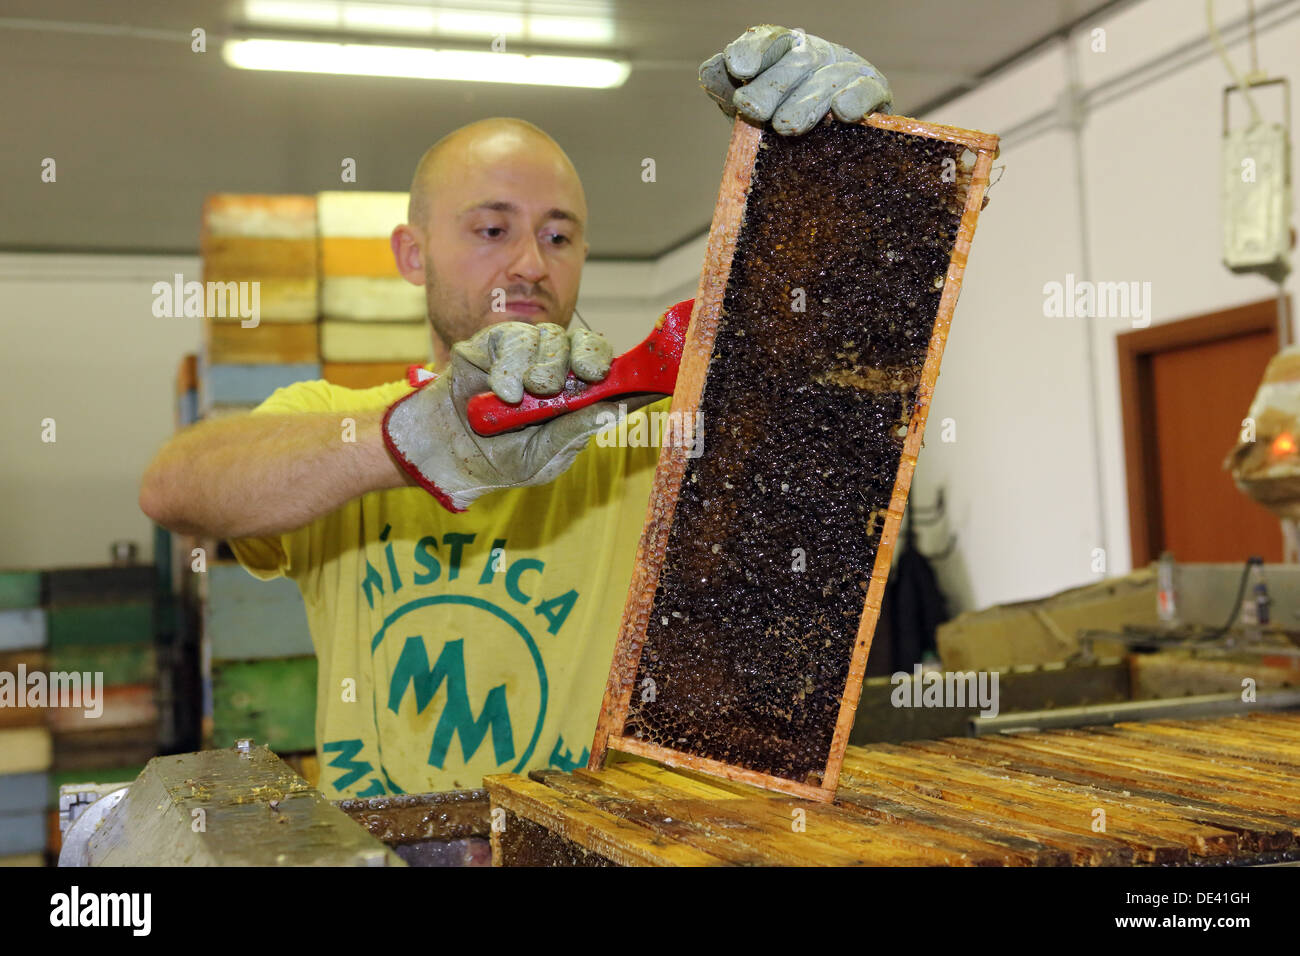 Castel Giorgio, Italy, Beekeeper removes the wax cover a honeycomb Stock Photo